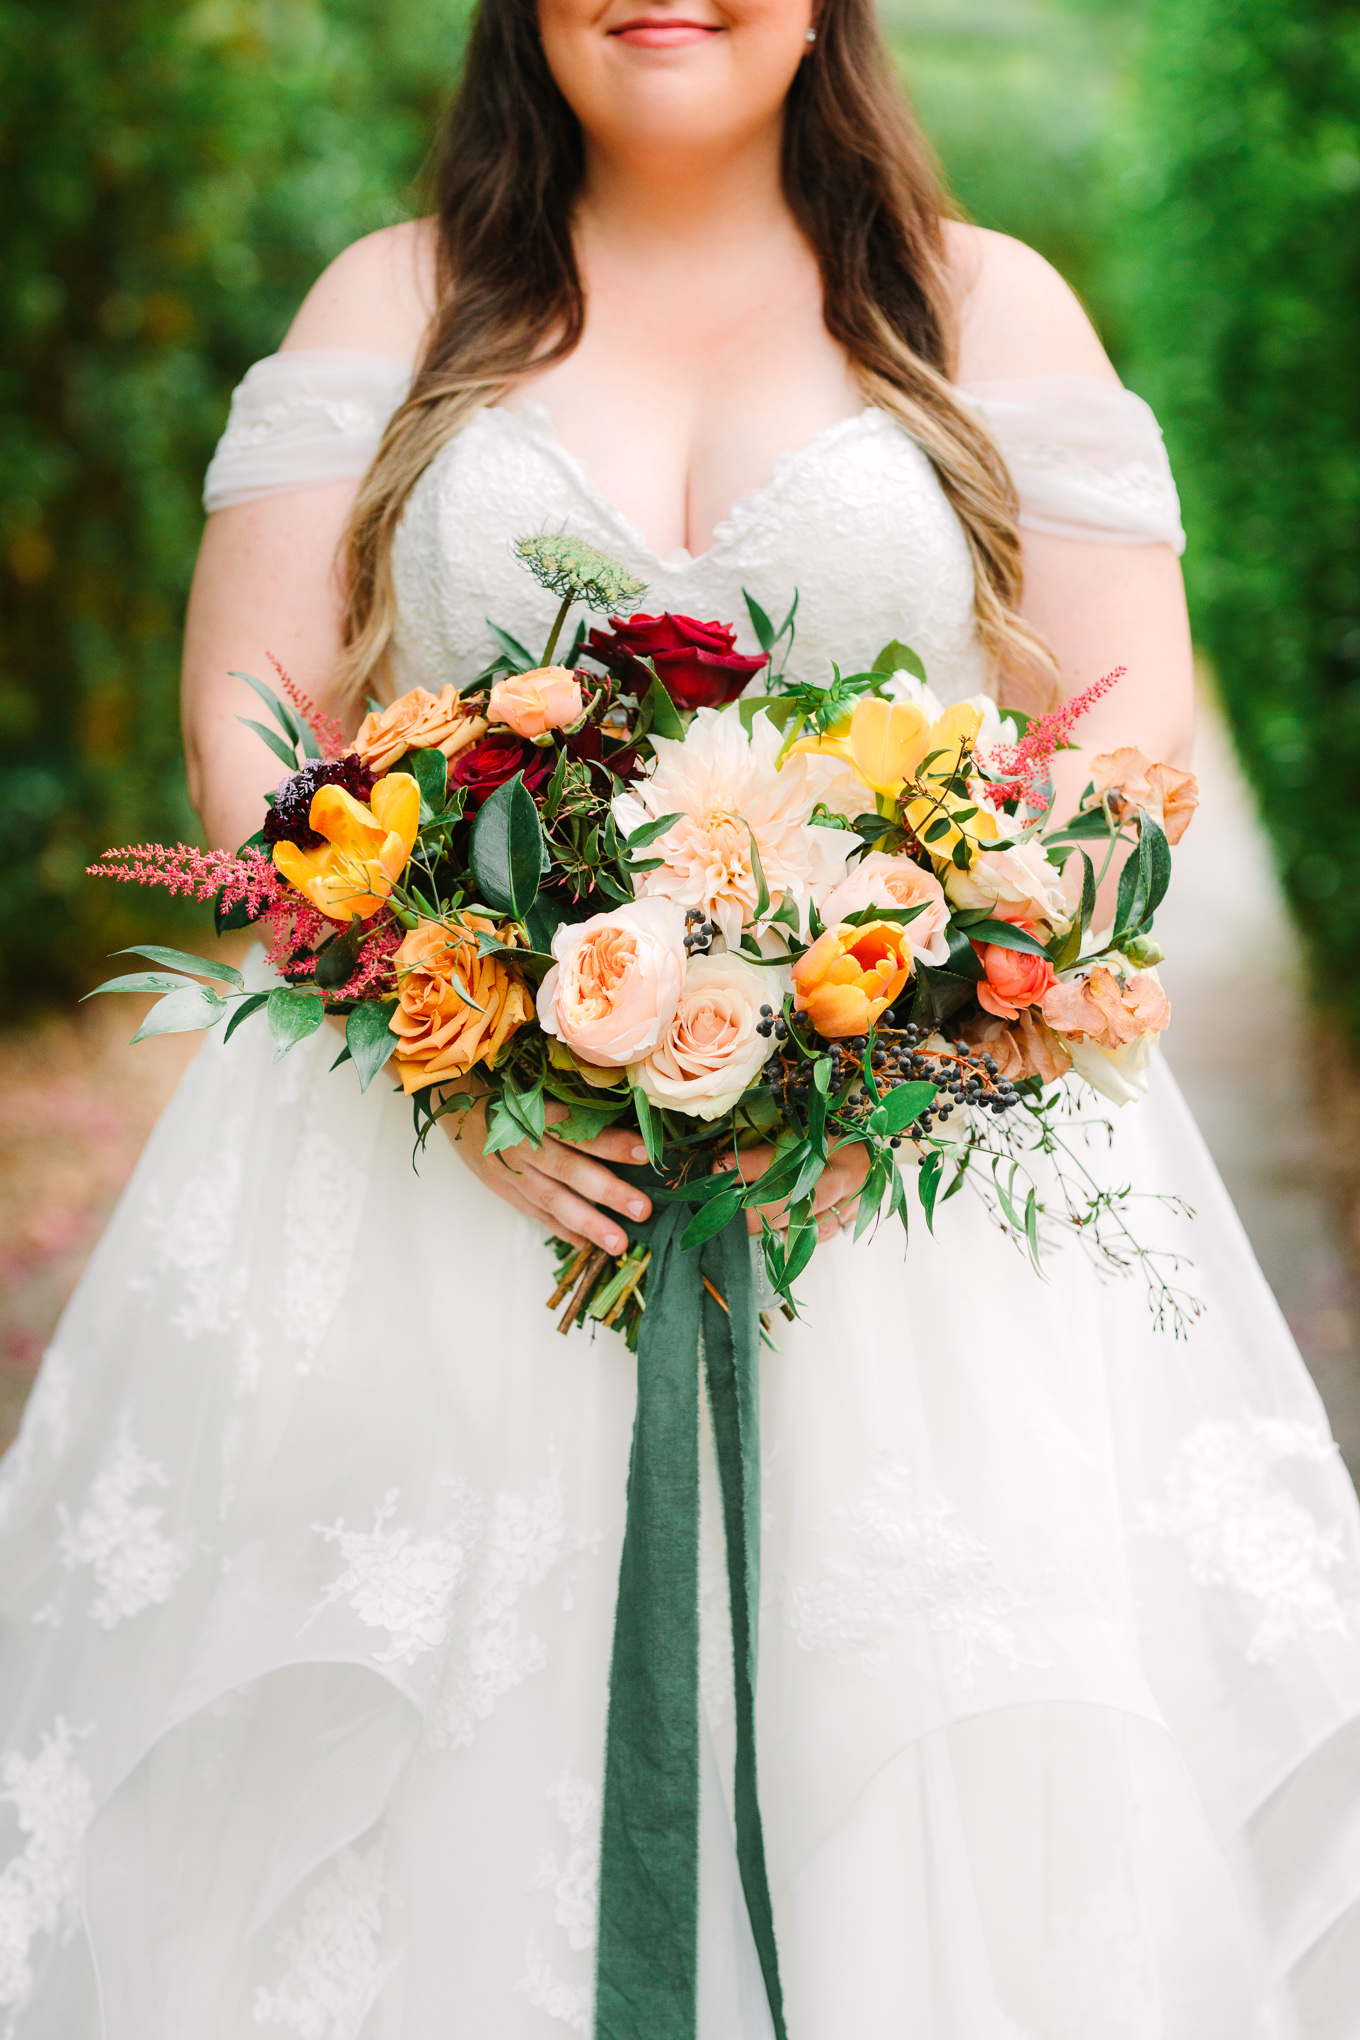 Winter jewel tone organic wedding flowers with emerald ribbon | Beautiful bridal bouquet inspiration and advice | Colorful and elevated wedding photography for fun-loving couples in Southern California | #weddingflowers #weddingbouquet #bridebouquet #bouquetideas #uniquebouquet   Source: Mary Costa Photography | Los Angeles